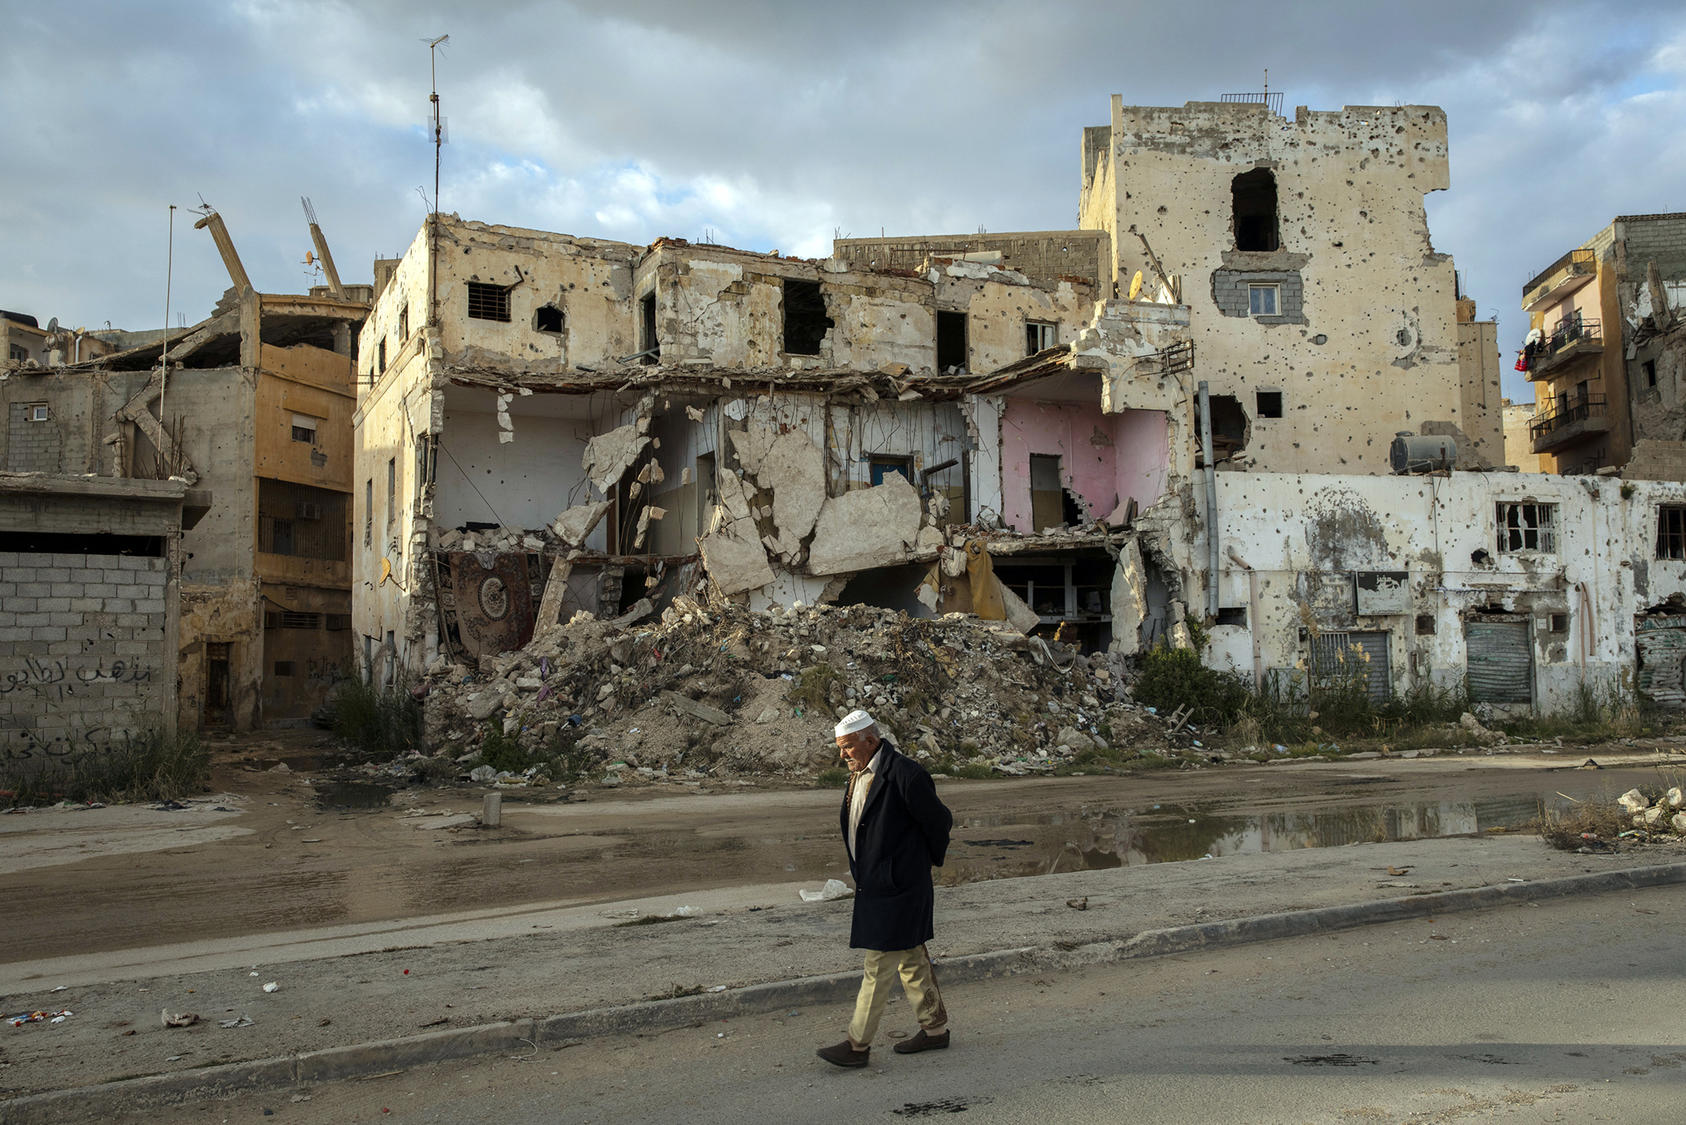 A man walks past the ruins left by years of conflict in the historic center of Benghazi, Libya, on Jan. 20, 2020. A new U.S. strategy aims to address the underlying drivers of conflict in countries like Libya.    (Ivor Prickett/The New York Times)